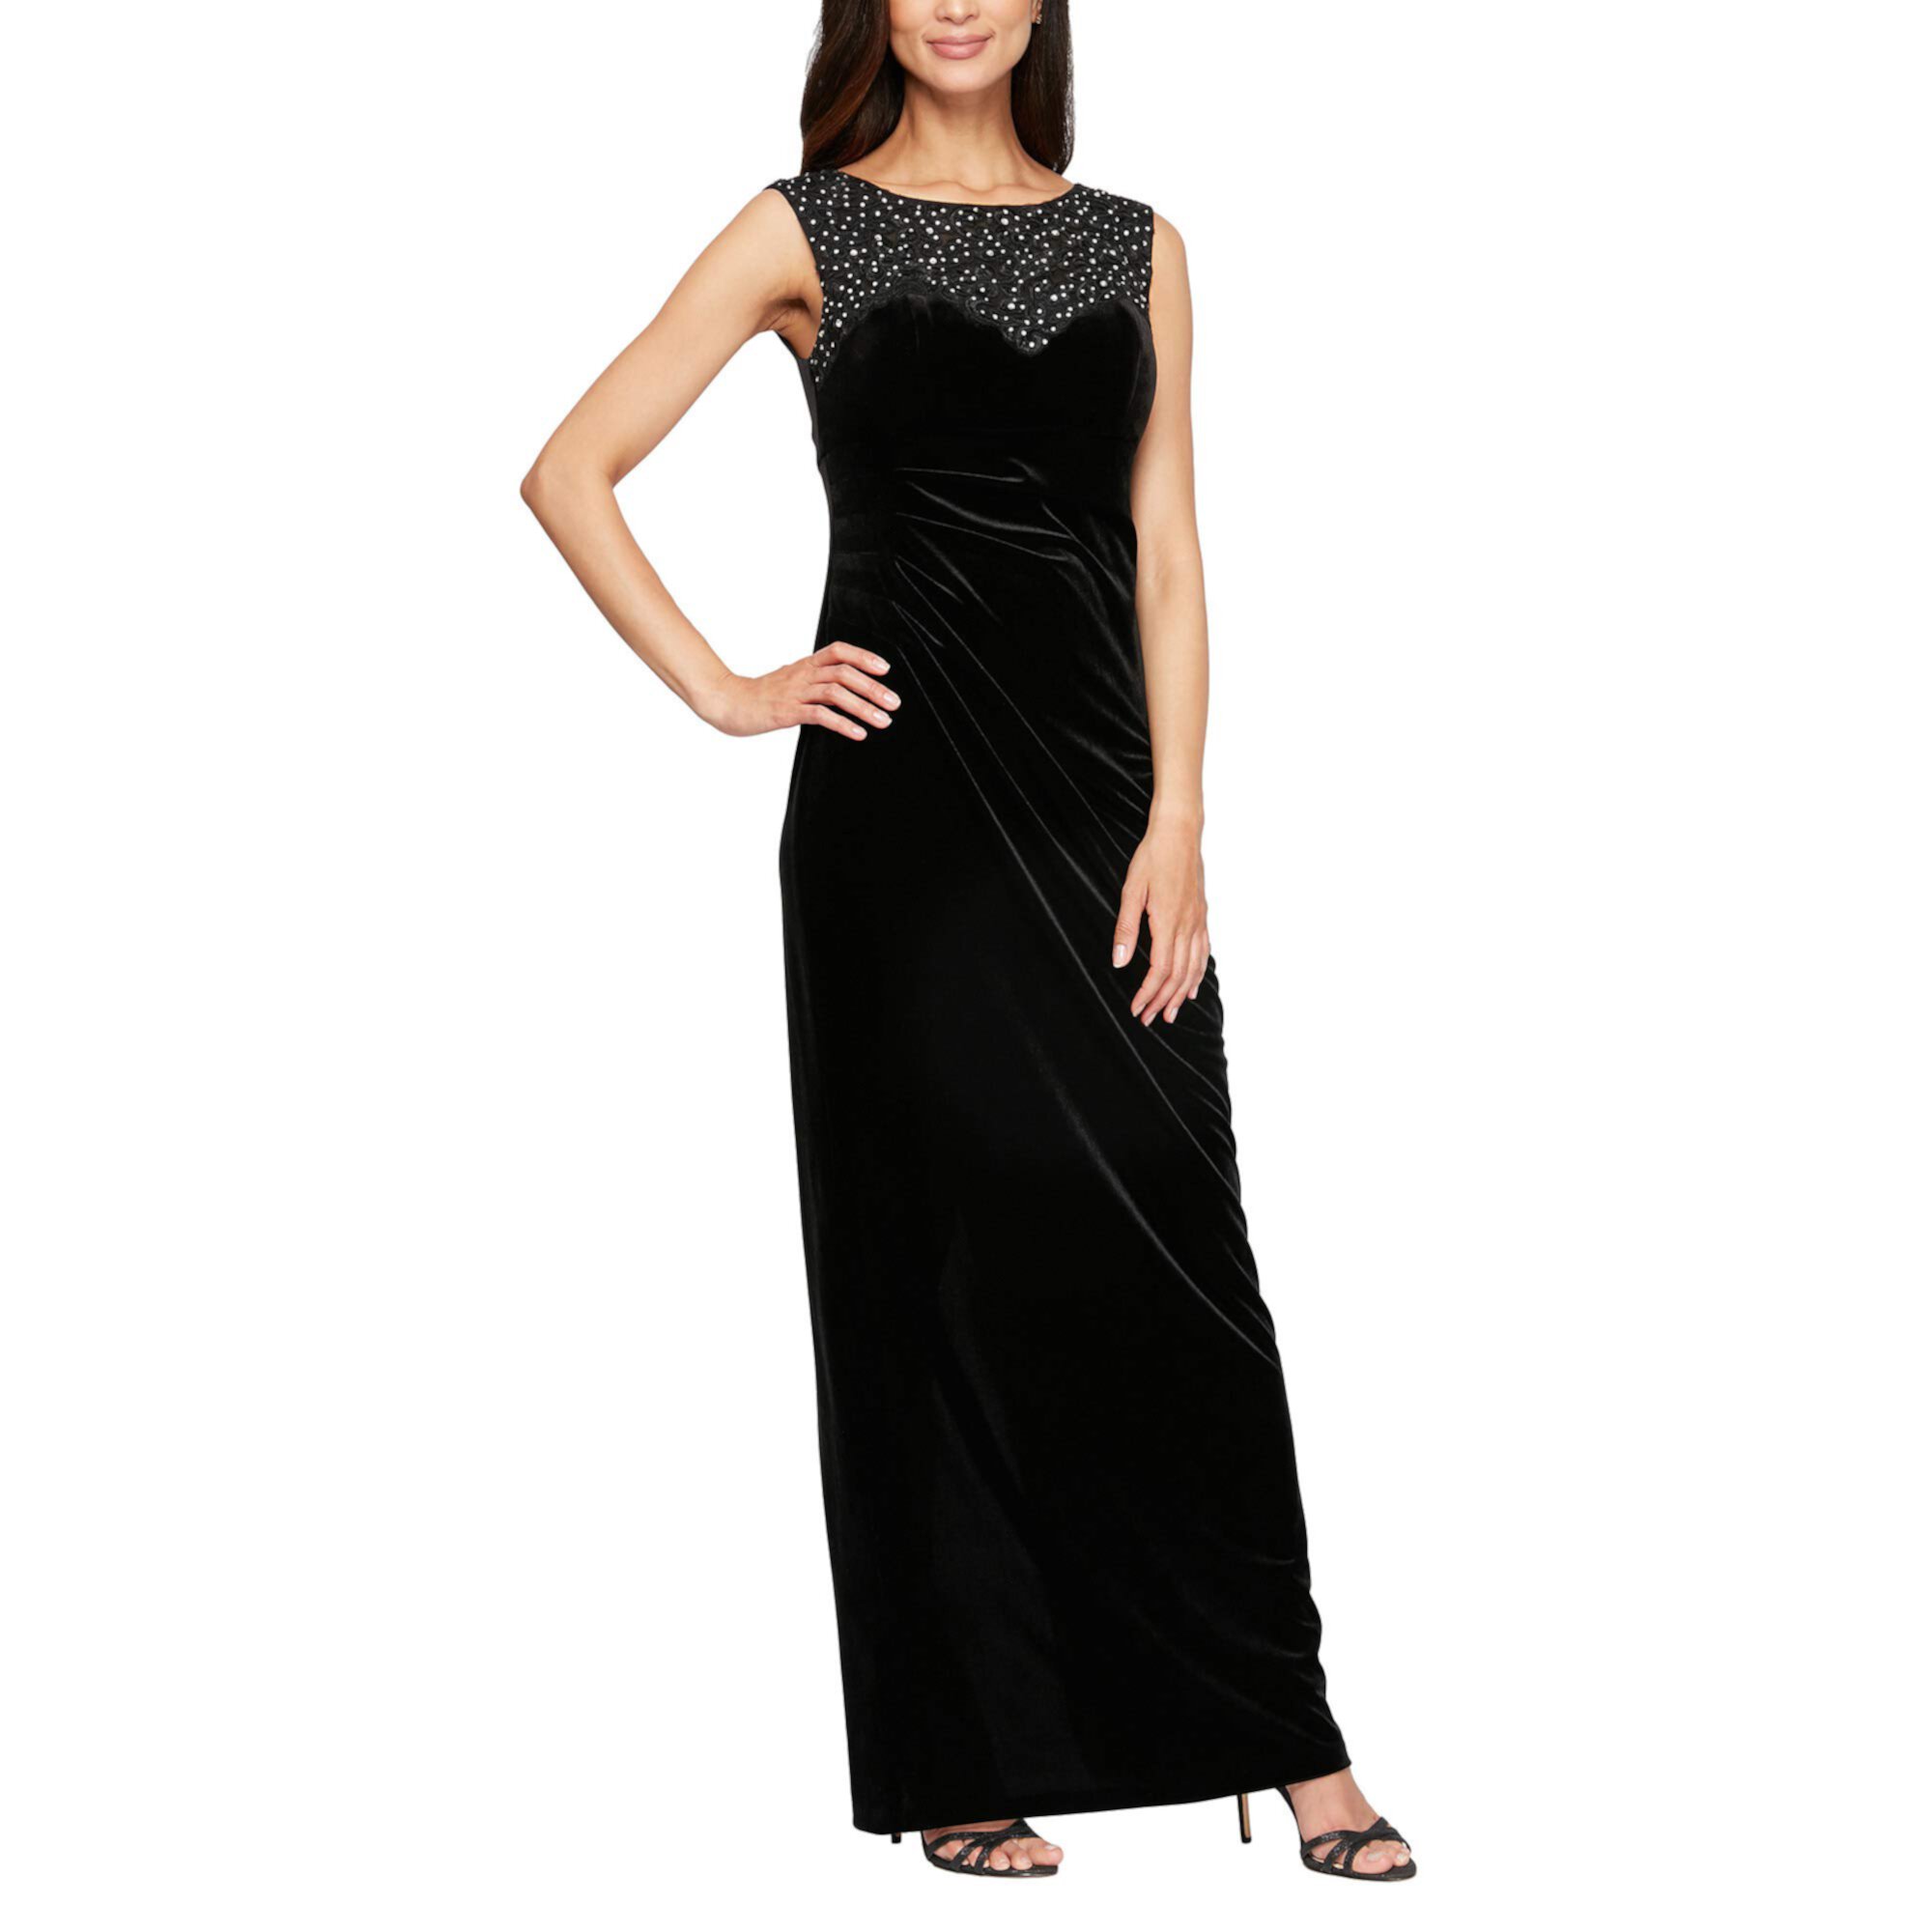 Long Sleeveless Column Dress with Embroidered and Embellished Illusion Neckline Alex Evenings